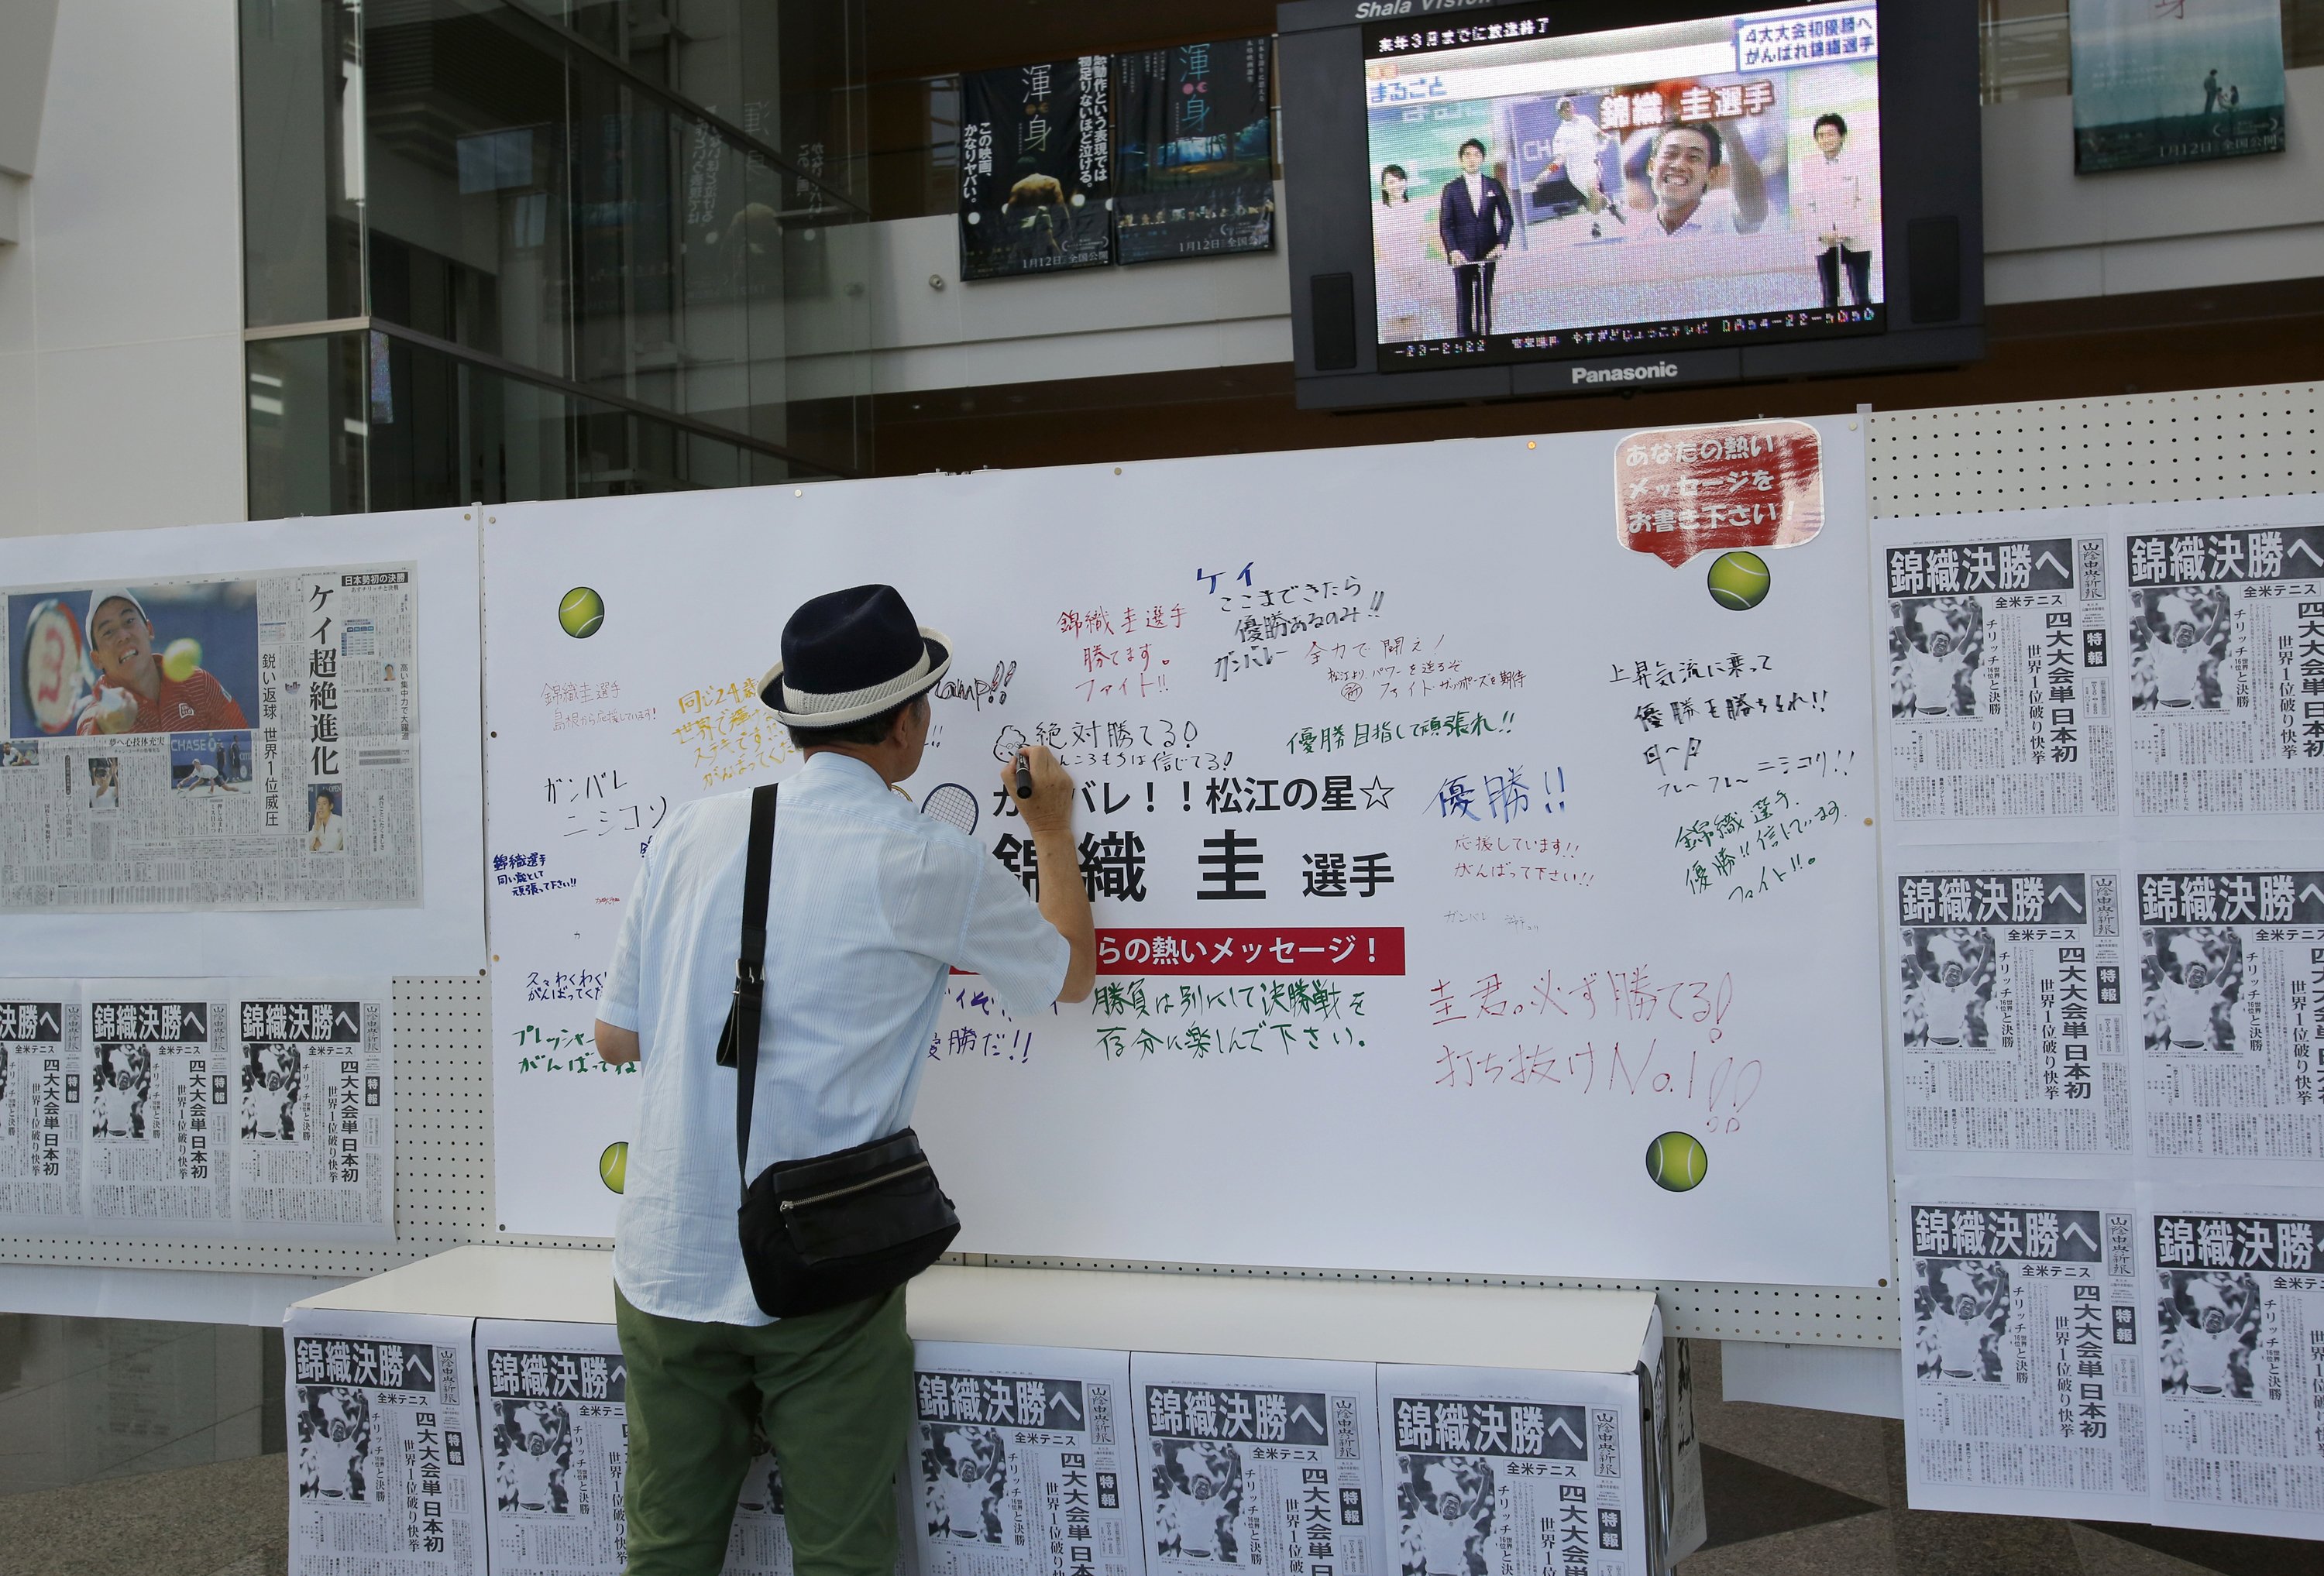 A man writes a message to Japanese tennis player Kei Nishikori on a board with newspapers reporting him in the U.S. Open, in Nishikori's hometown of Matsue, Japan on Sept. 8, 2014.